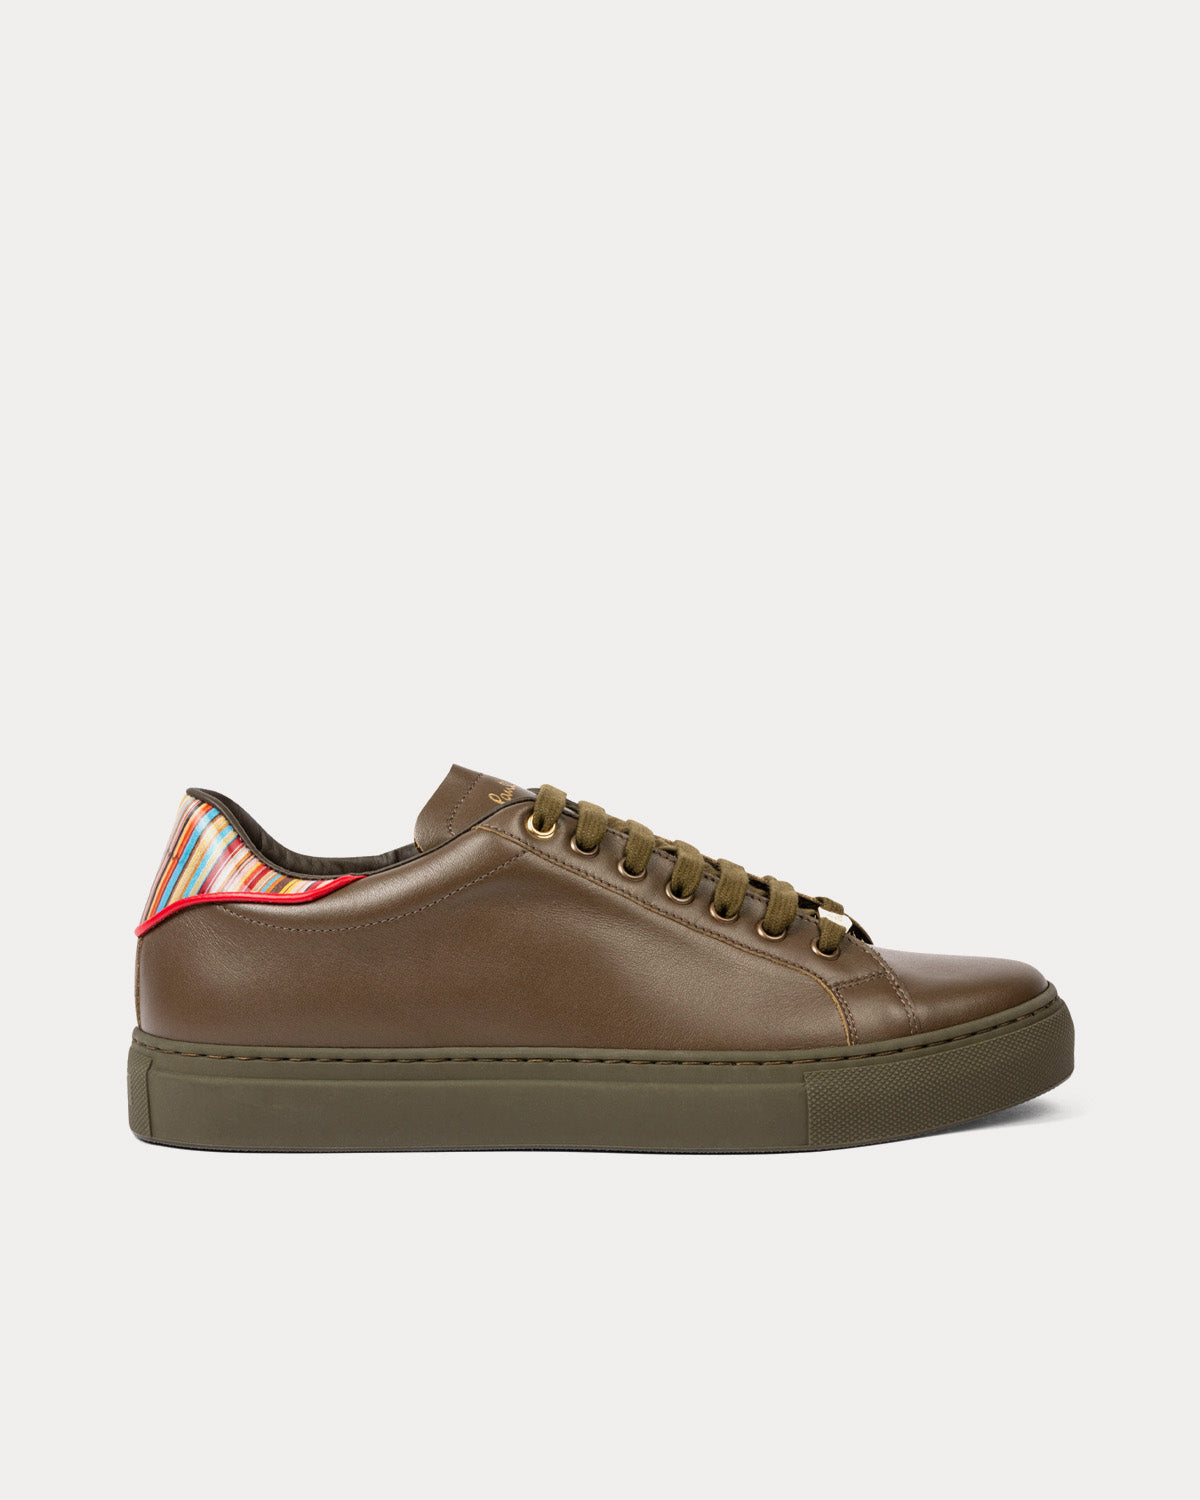 Paul Smith - Beck with Signature Stripe Leather Khaki Low Top Sneakers